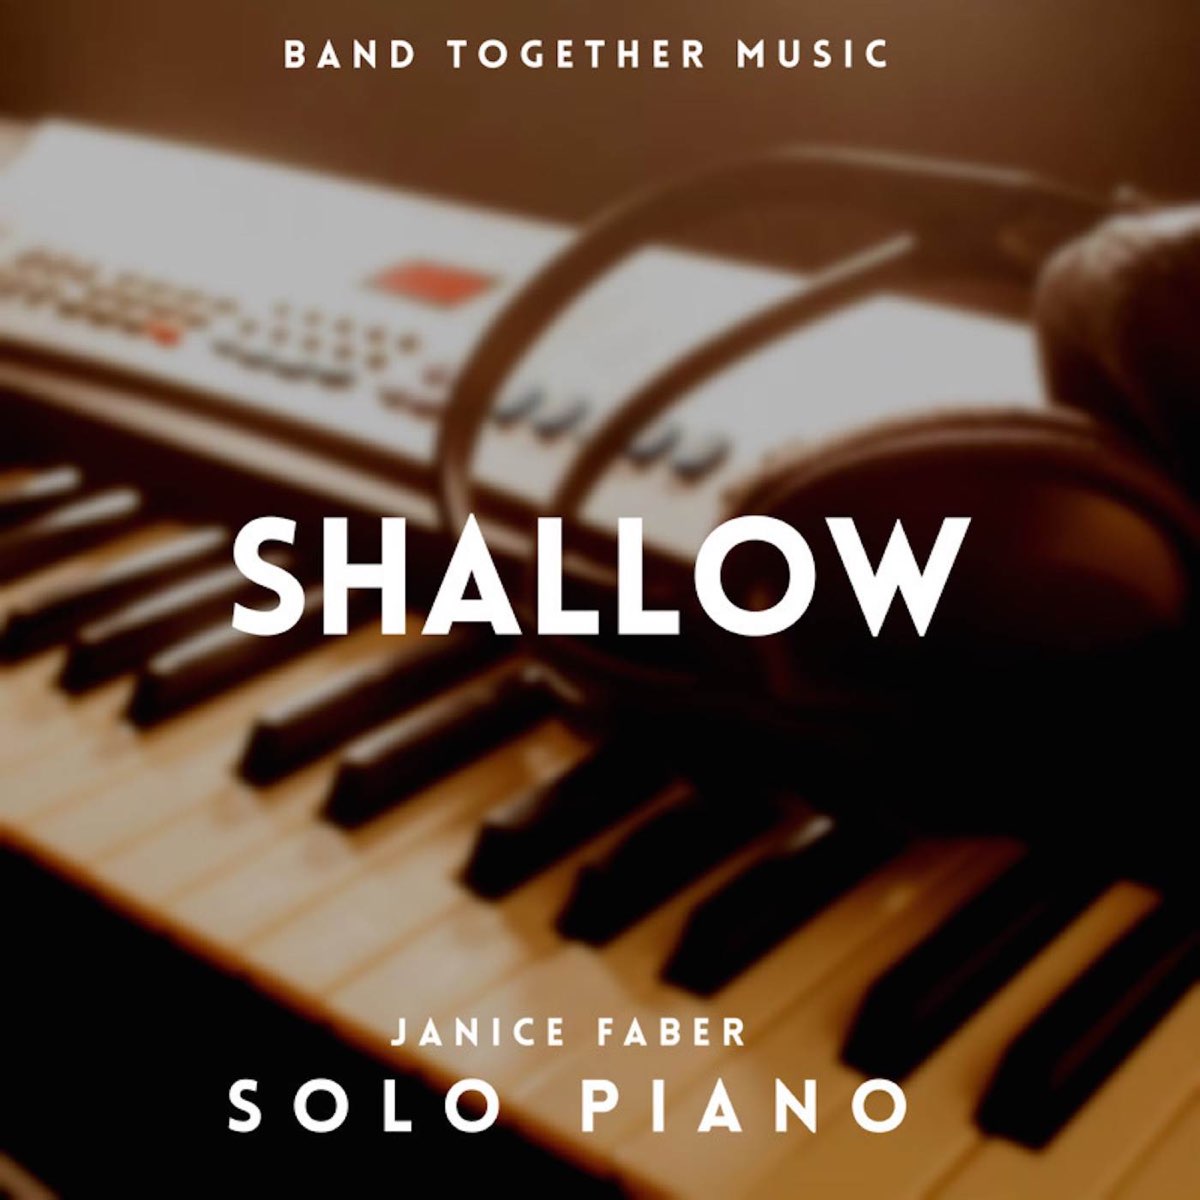 Shallow (Solo Piano) - Single by Janice Faber on Apple Music